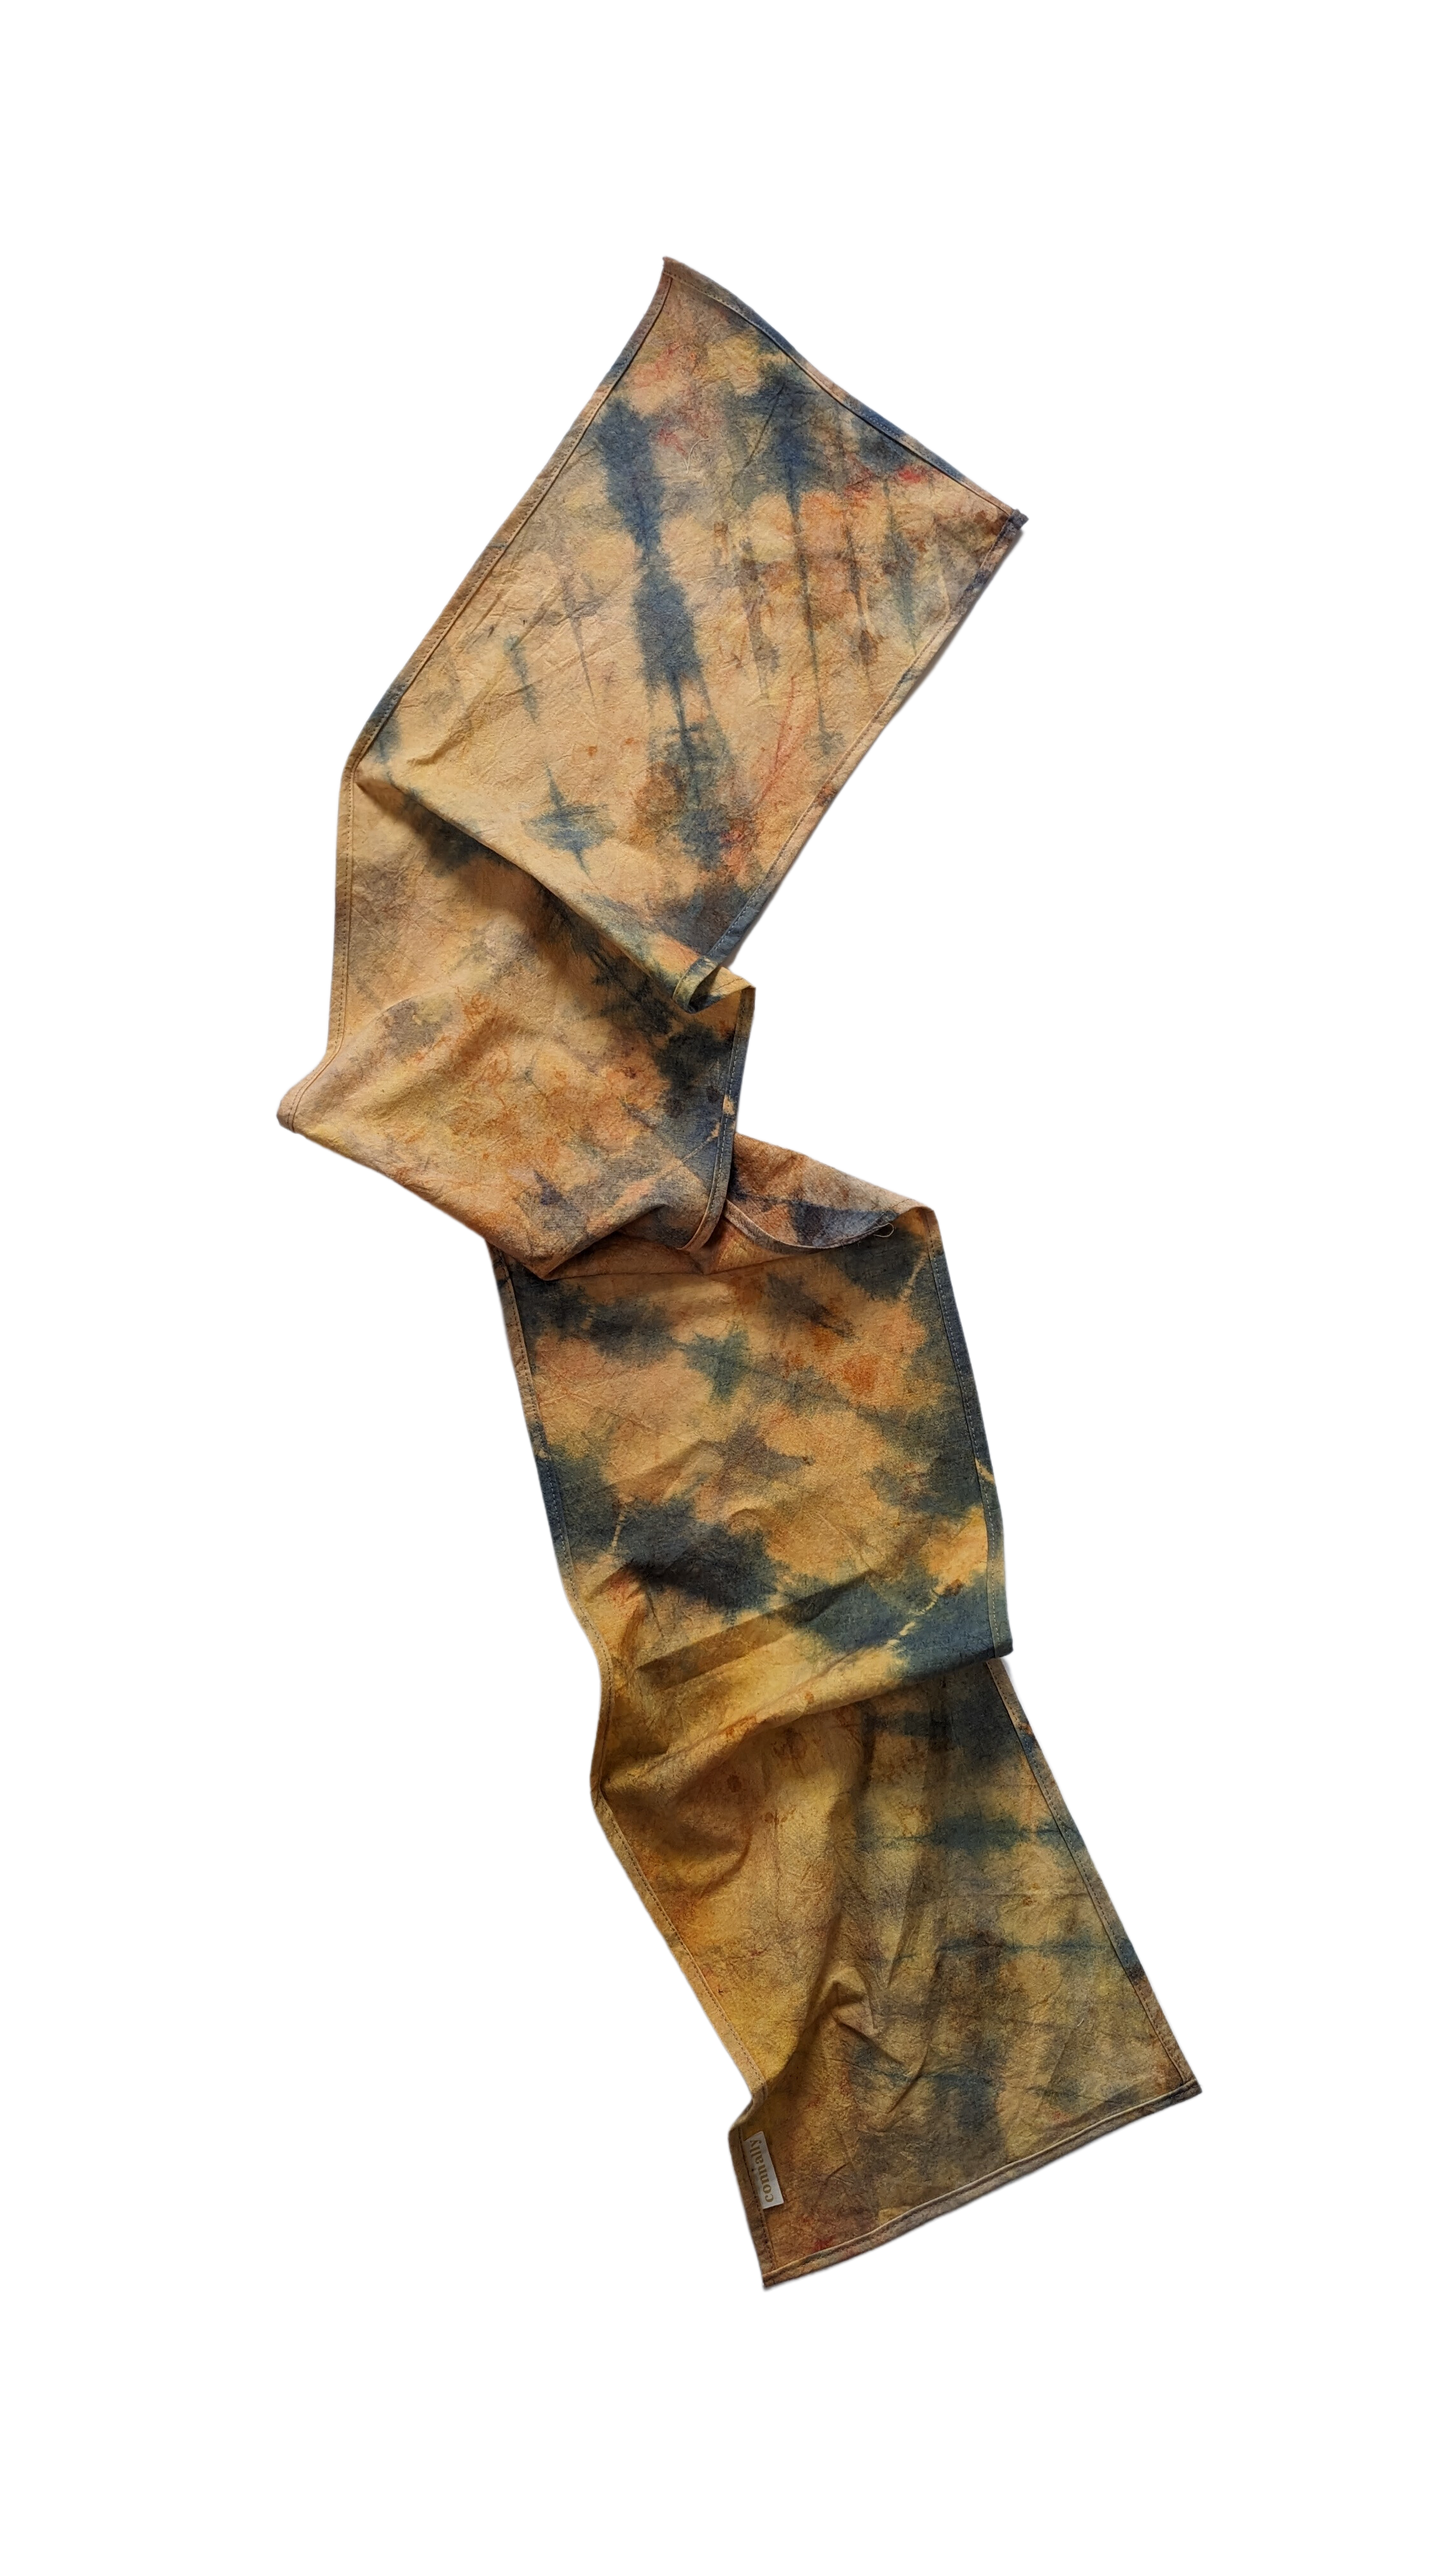 Hand Dyed Organic Cotton Scarf by Connally Goods